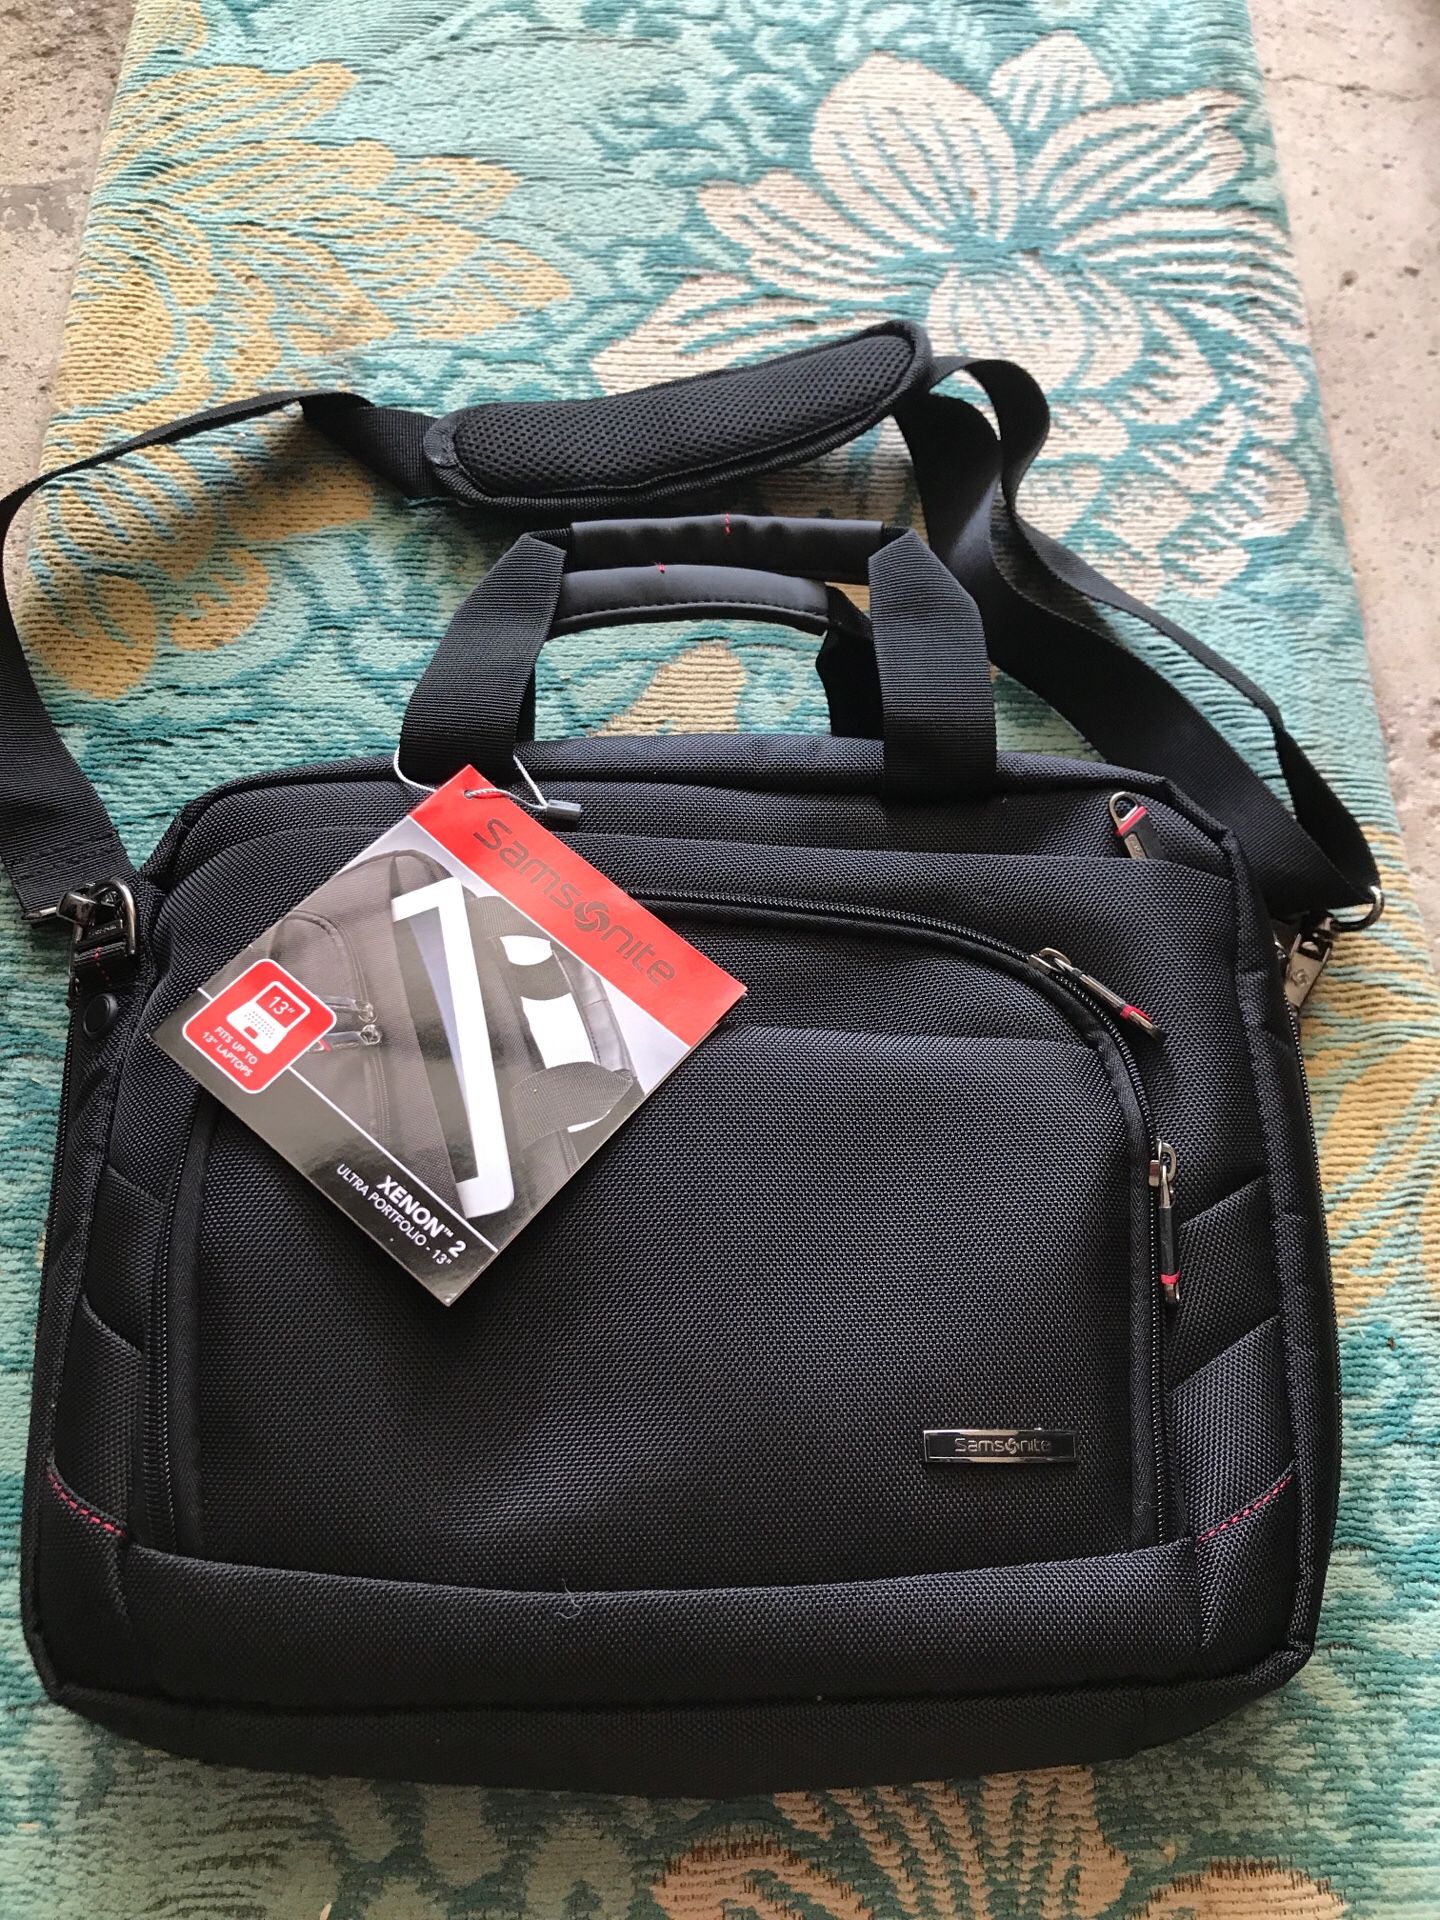 Samsonite laptop case New with Tags